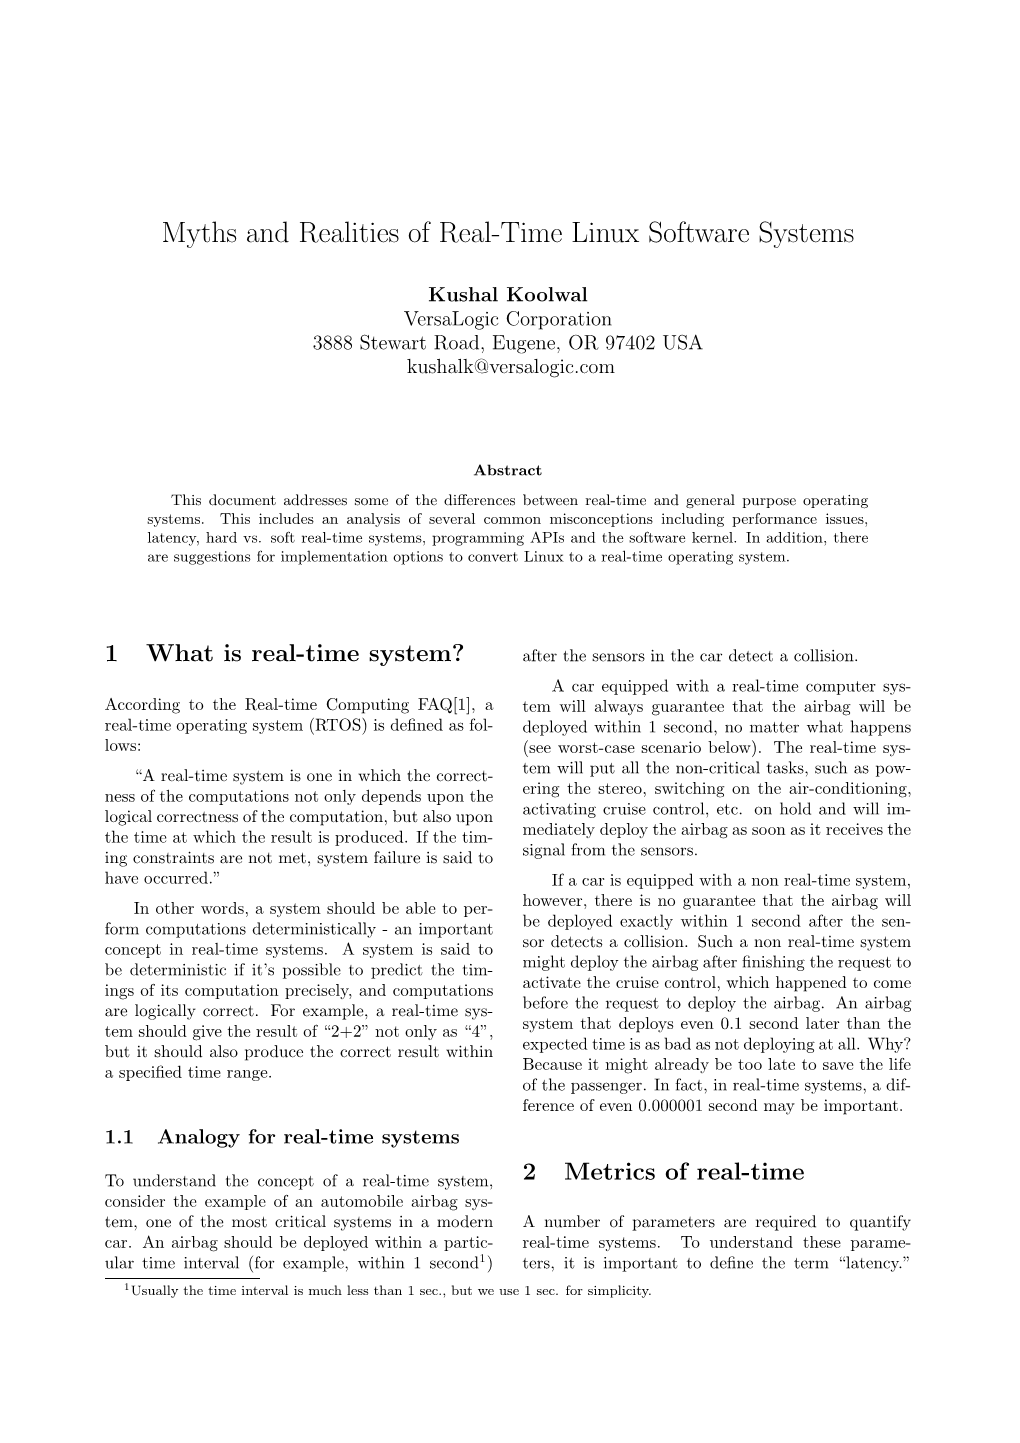 Myths and Realities of Real-Time Linux Software Systems